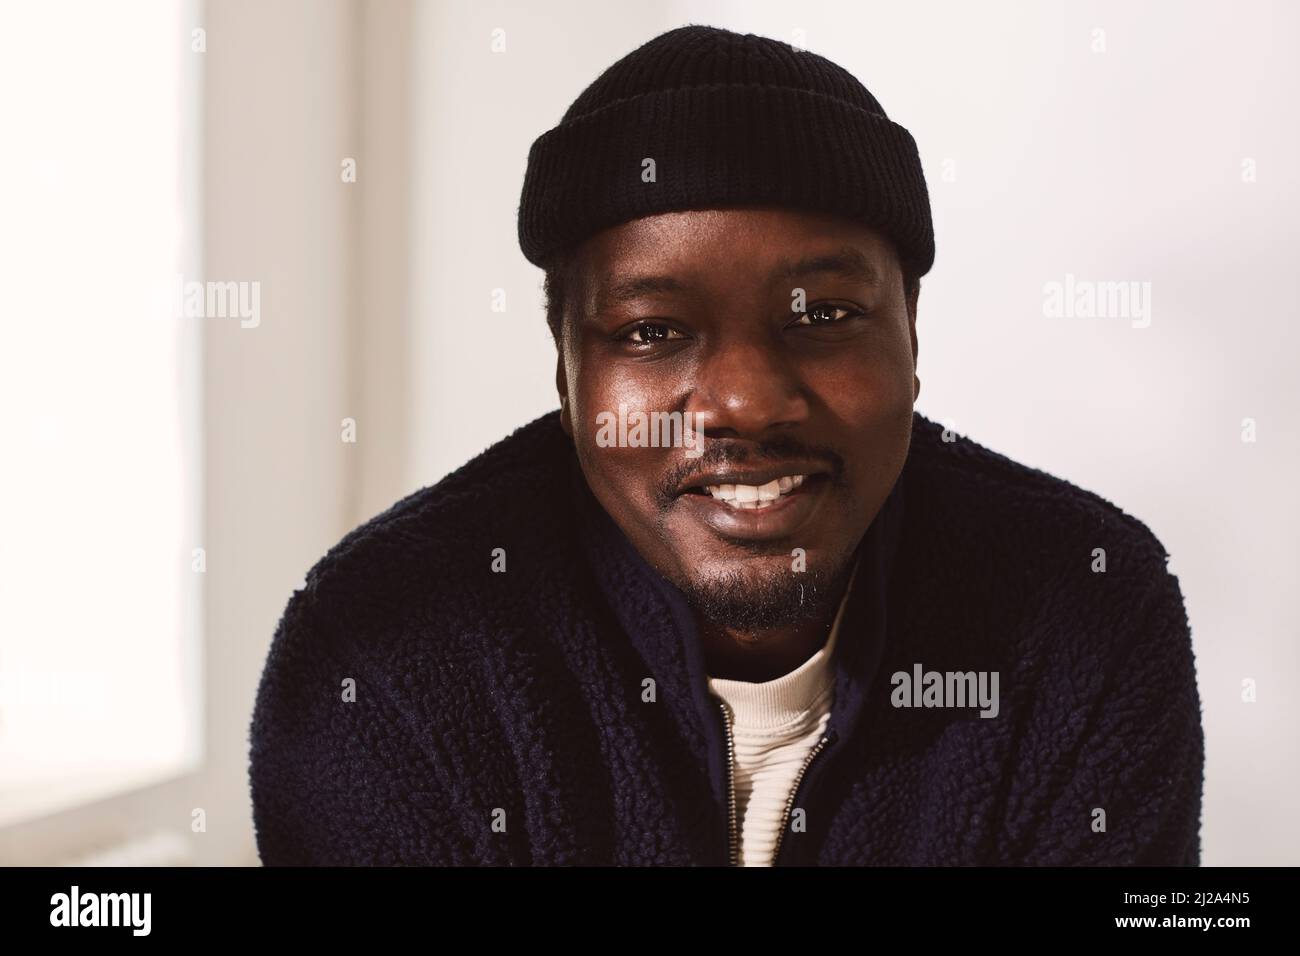 Smiling mid adult man wearing knit hat against wall Stock Photo